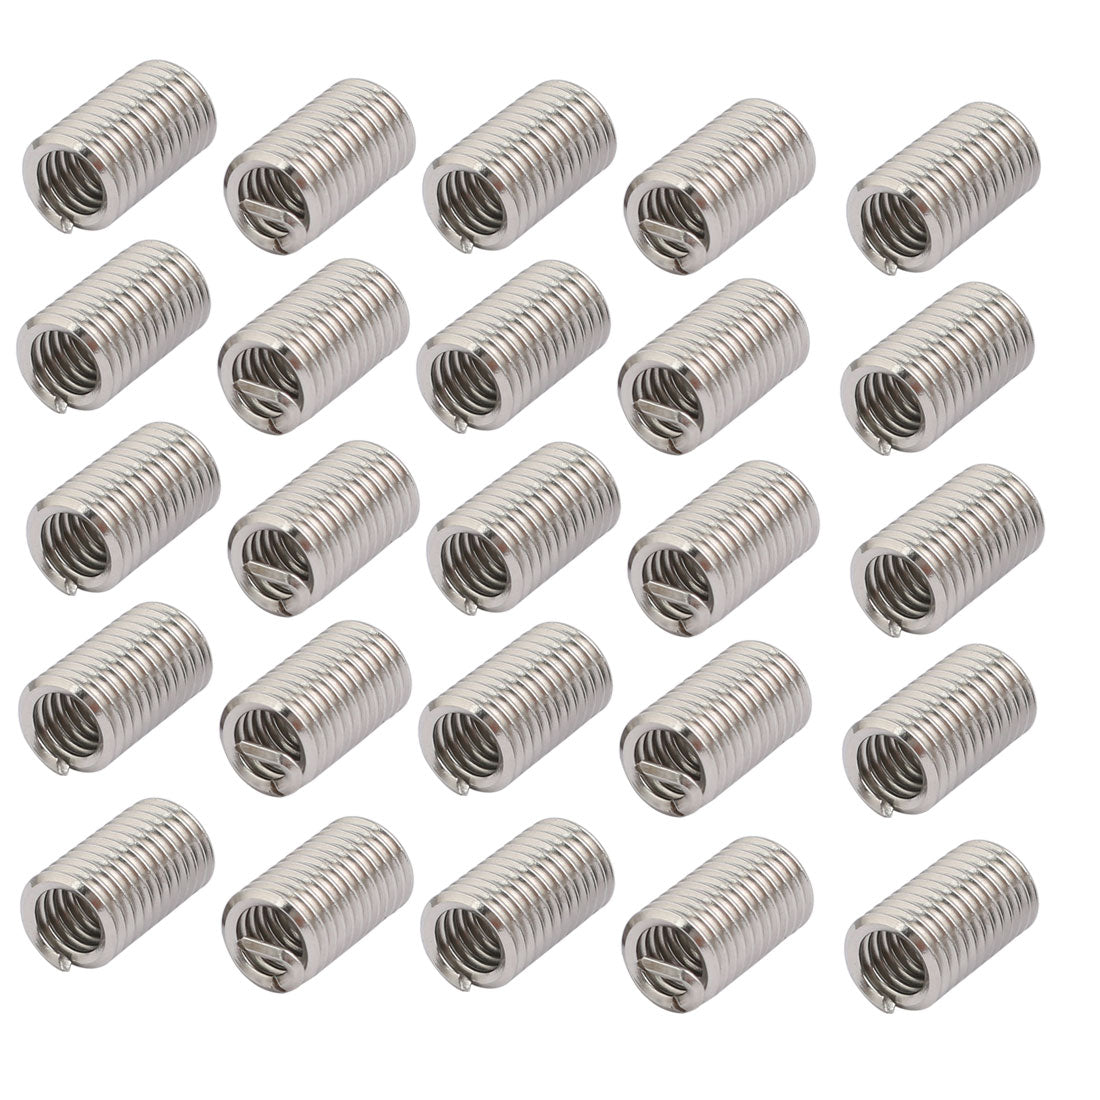 uxcell Uxcell 1/4-20x0.75" 304 Stainless Steel Helical Coil Wire Thread Insert 25pcs